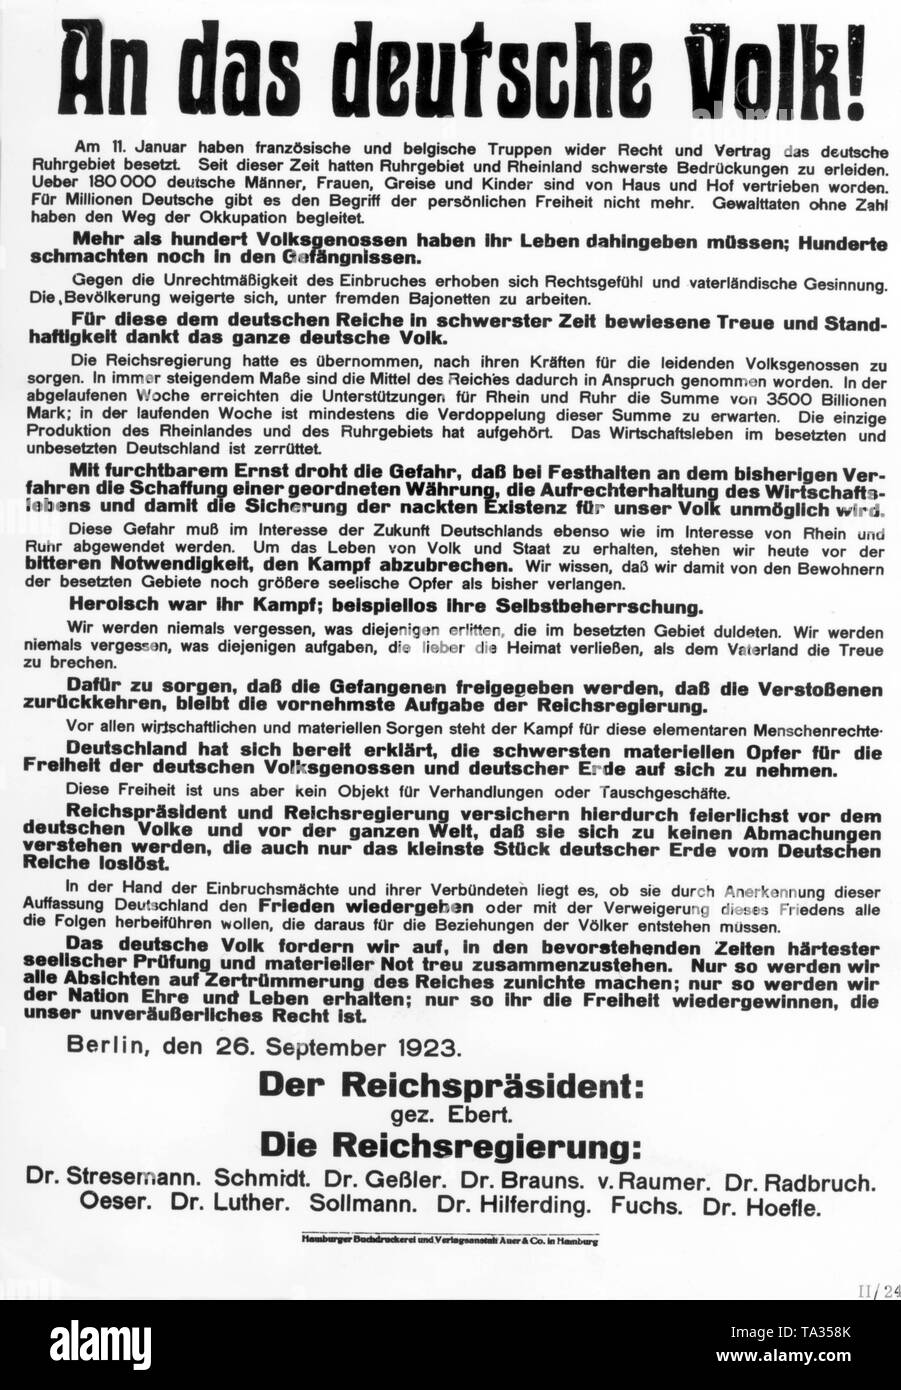 More than eight months after the commencement of the occupation, the government under President Friedrich Ebert and Reich Chancellor Gustav Stresemann, continued to persuade people to hang on. It is being referred to the heroic struggle of the Ruhr Germans and the atrocities of the occupiers. Stock Photo